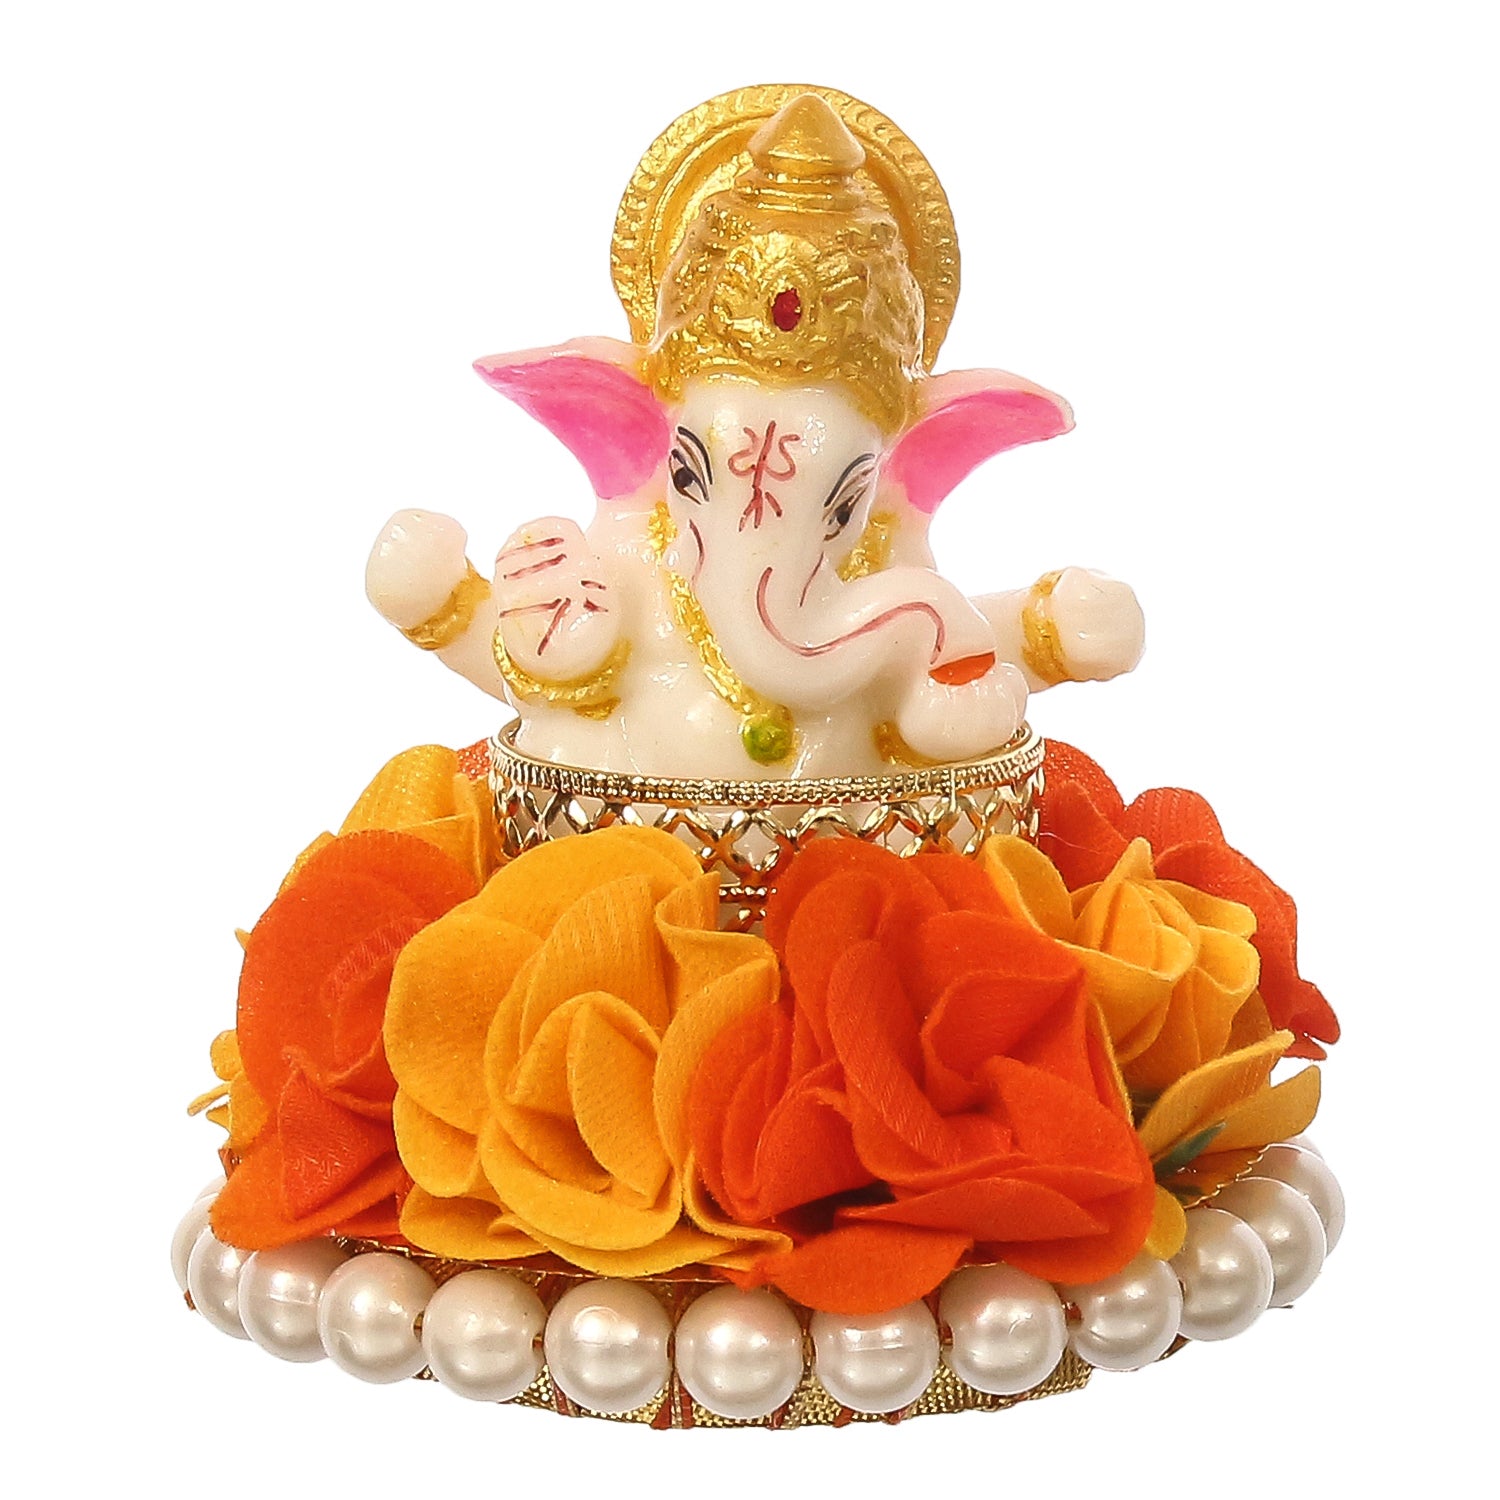 Lord Ganesha Idol On Decorative Handcrafted Orange And Yellow Flowers Plate 2